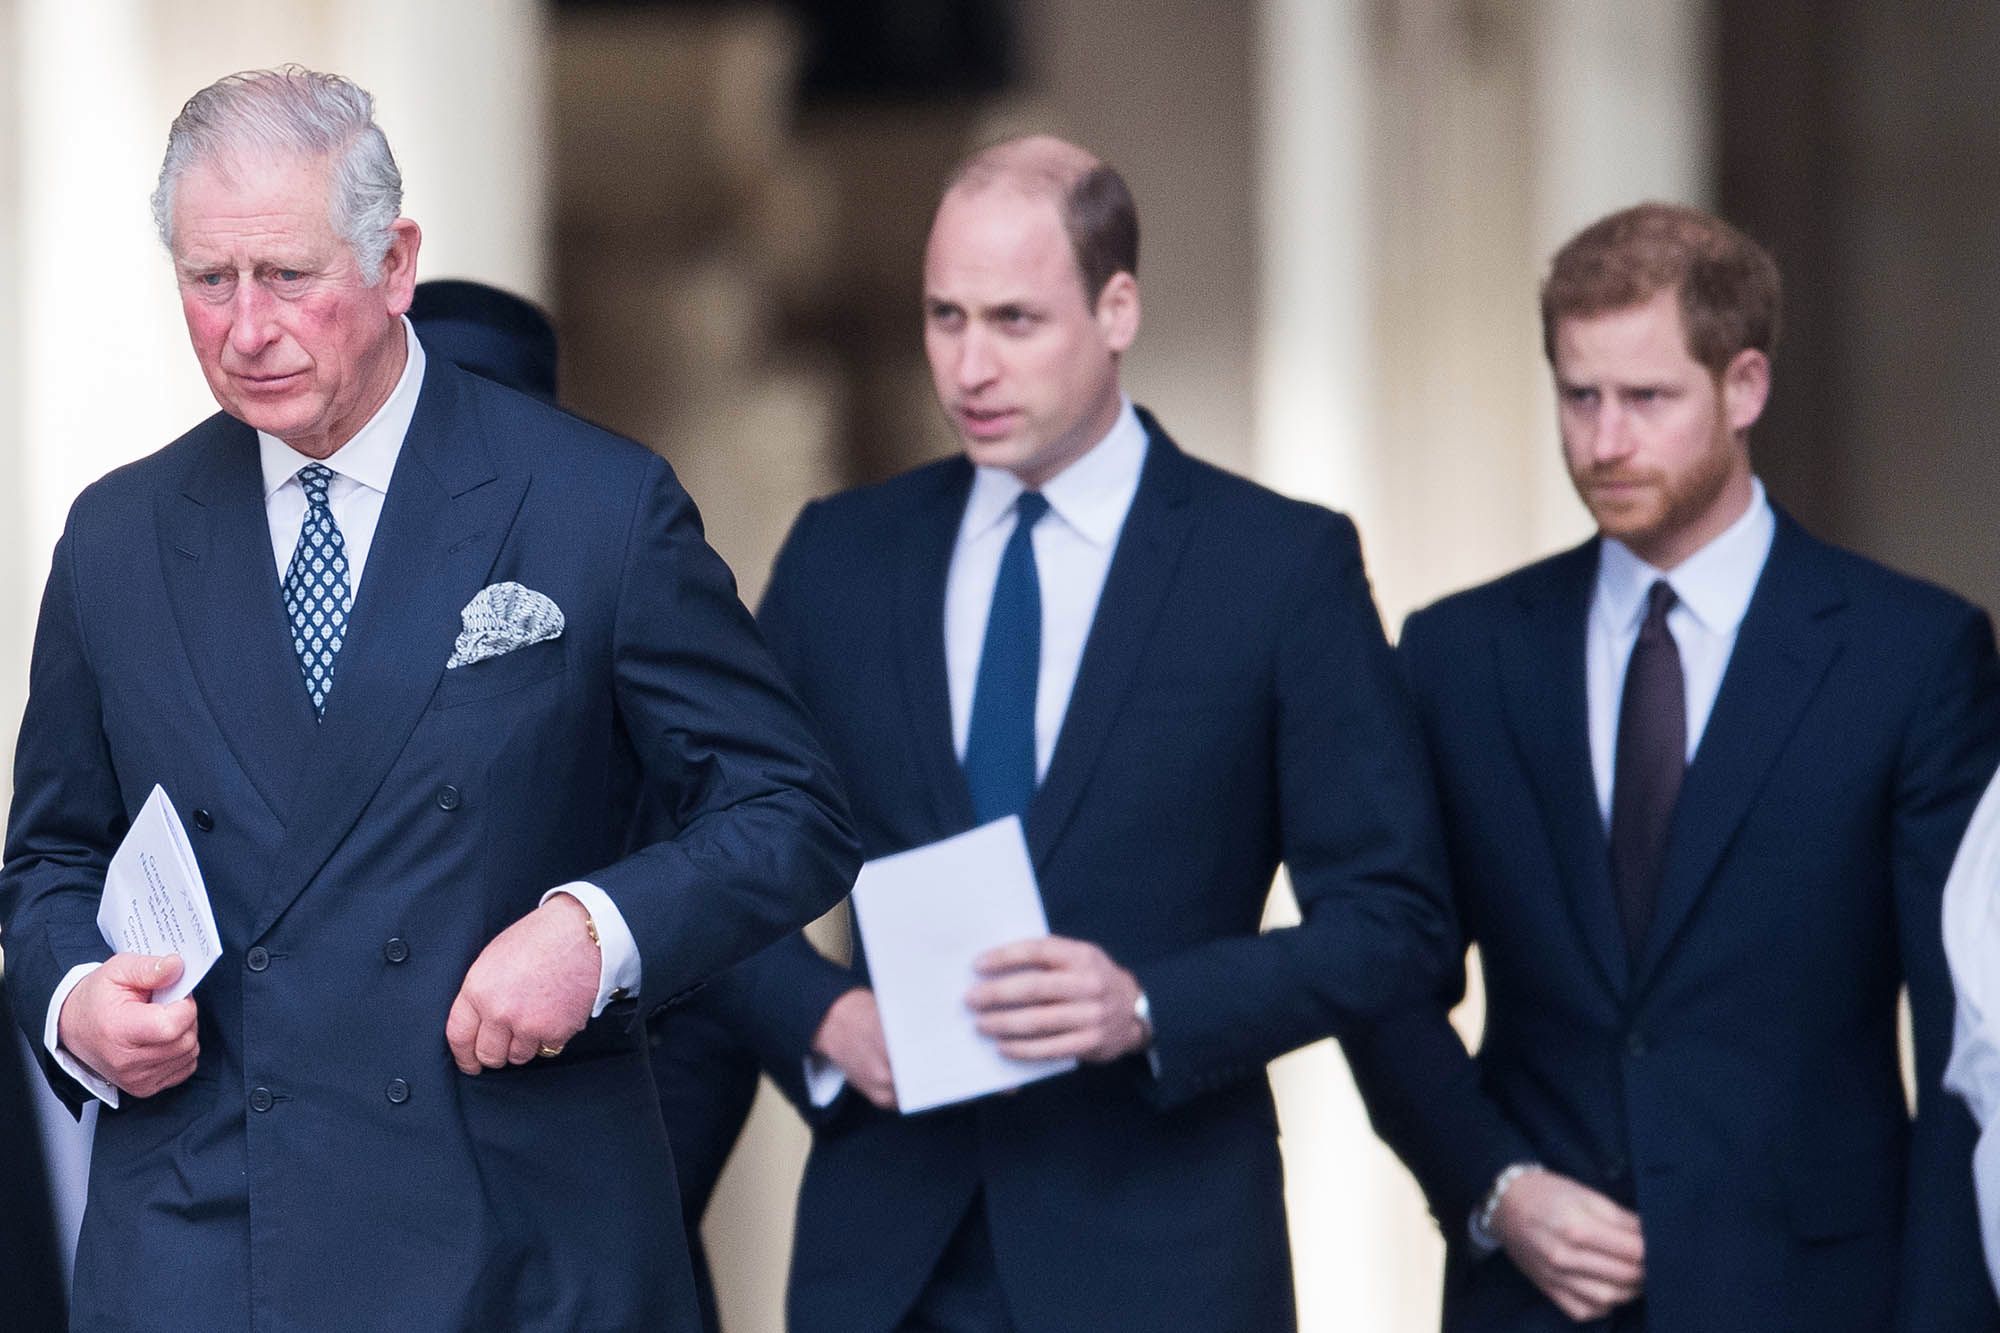  Le prince Charles, le prince William, le prince Harry @Samir Hussein/WireImage